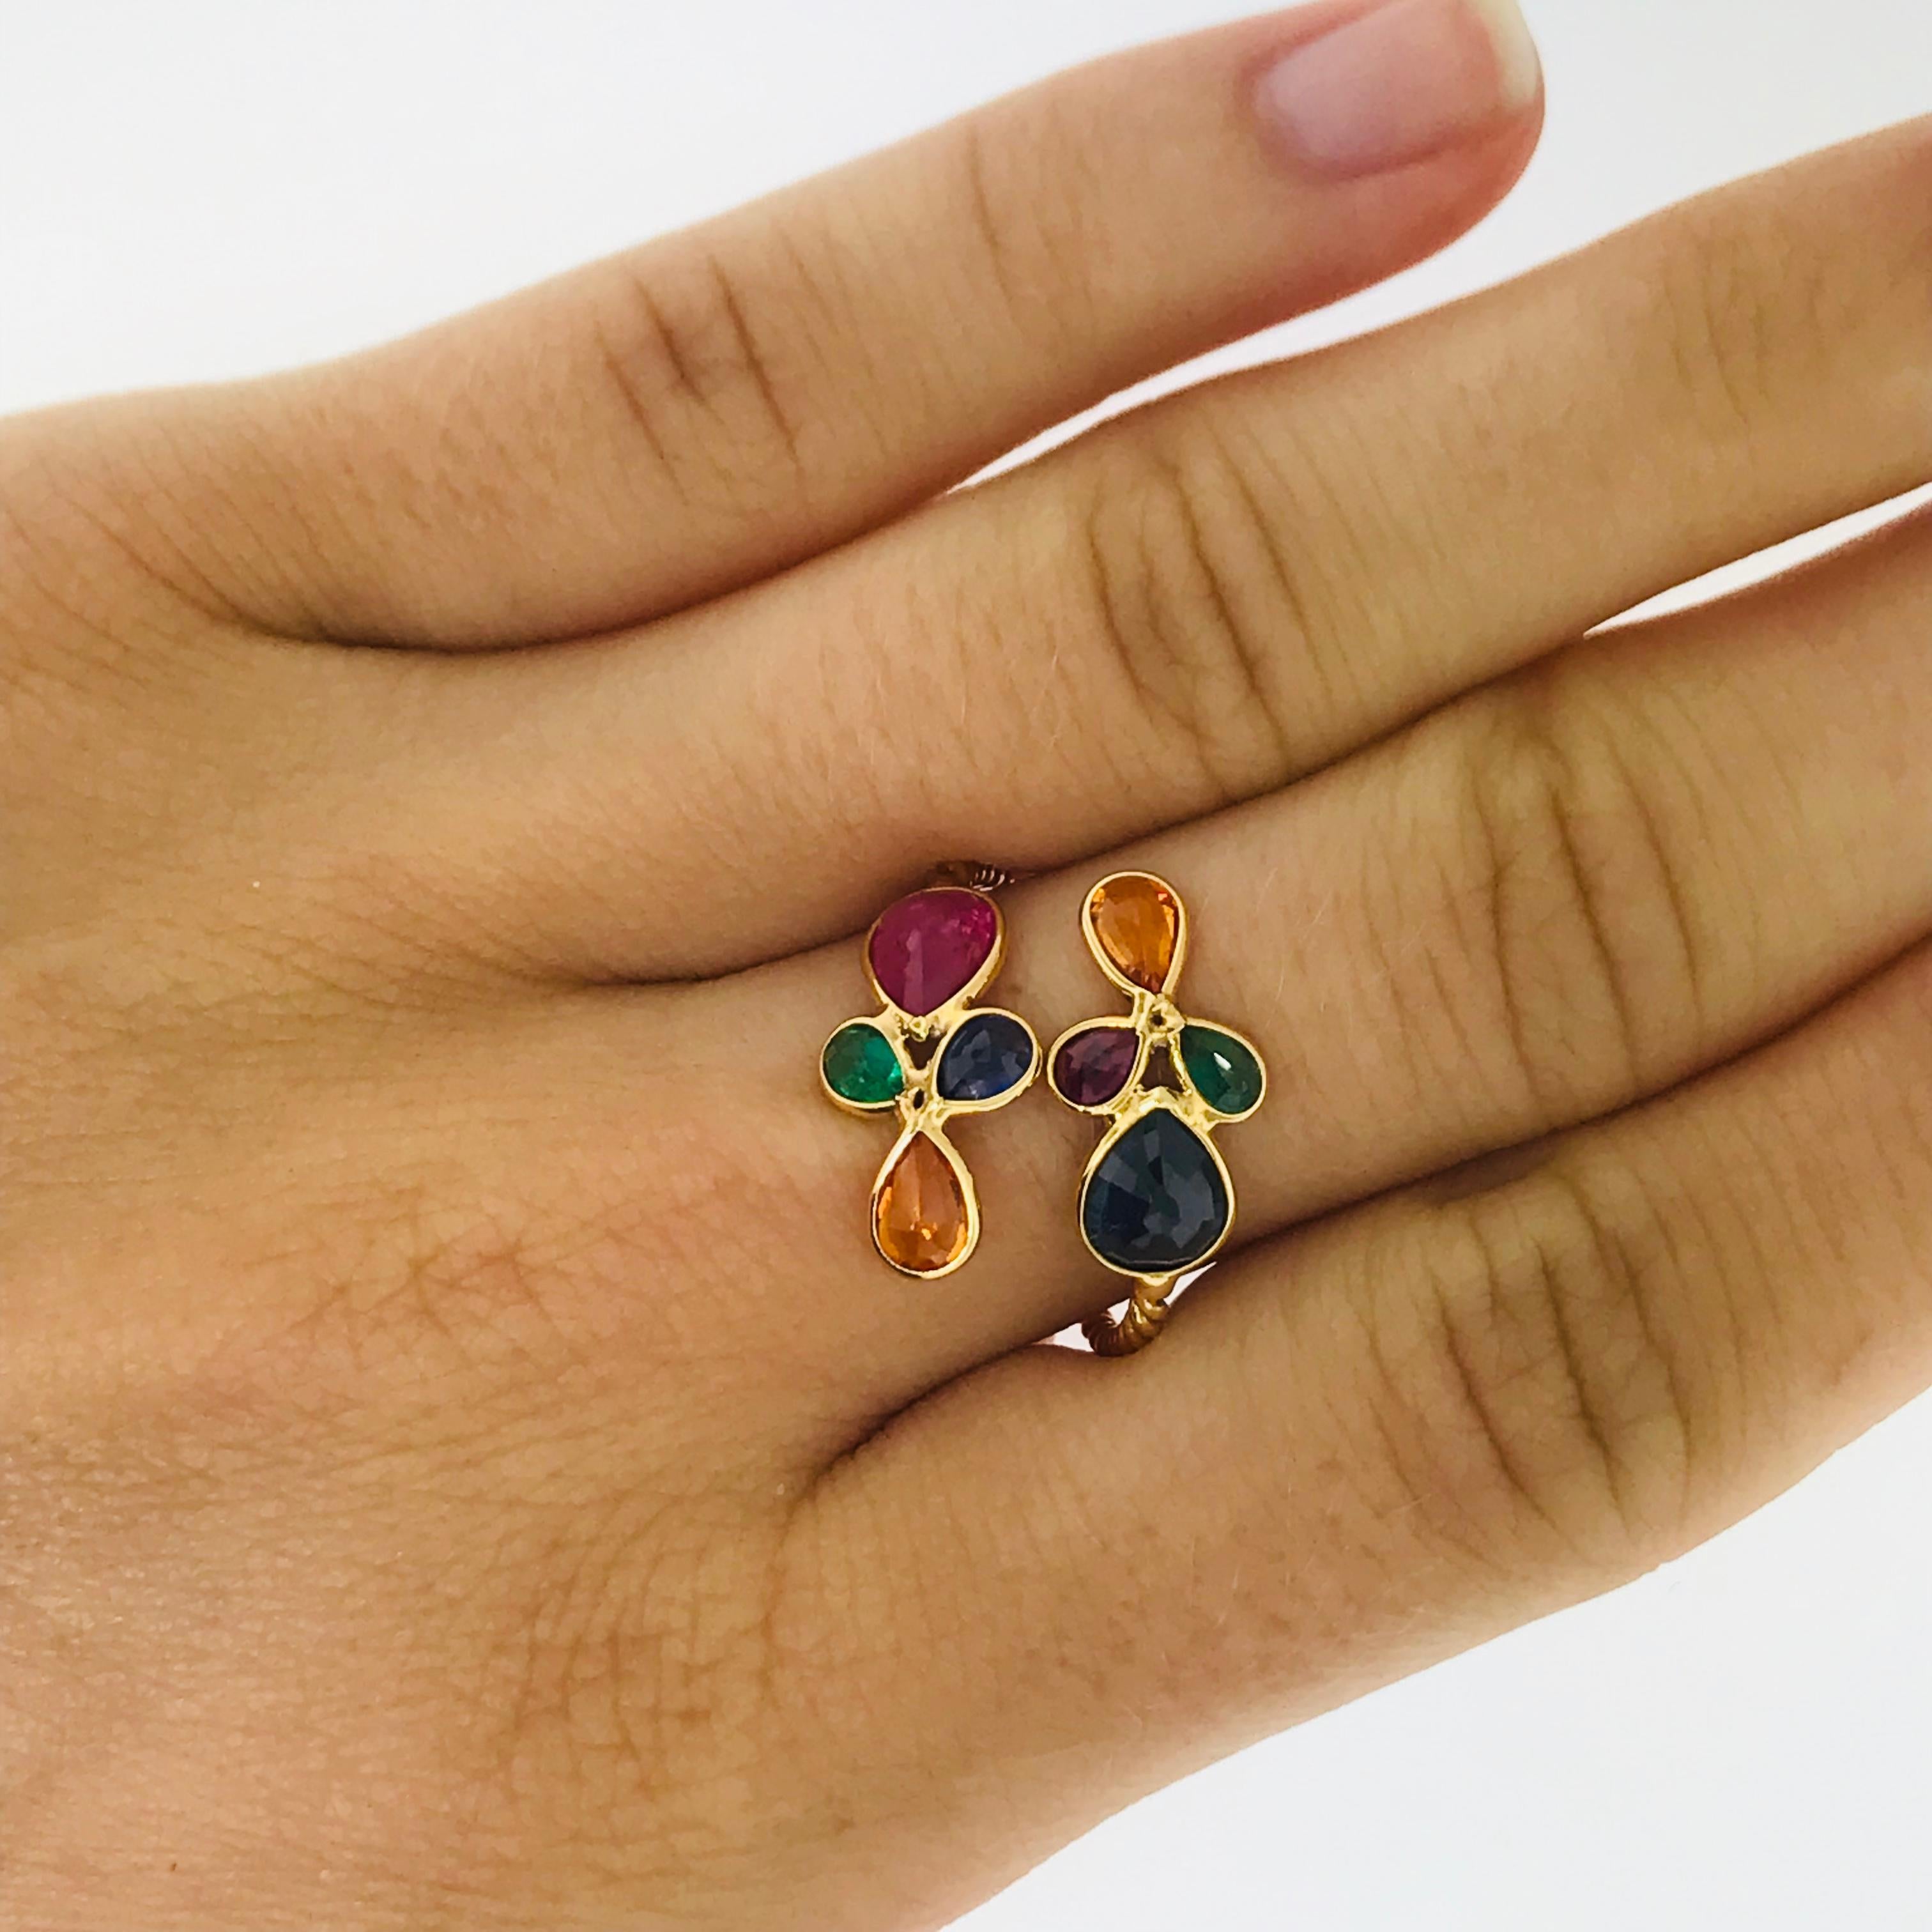 Genuine Sapphire & Gemstone Ring Original

Looking for a fun piece that will go with everything to add to your jewelry collection? Here it is! This Tresor original design is special and sure to brighten any attire, from everyday events to formal